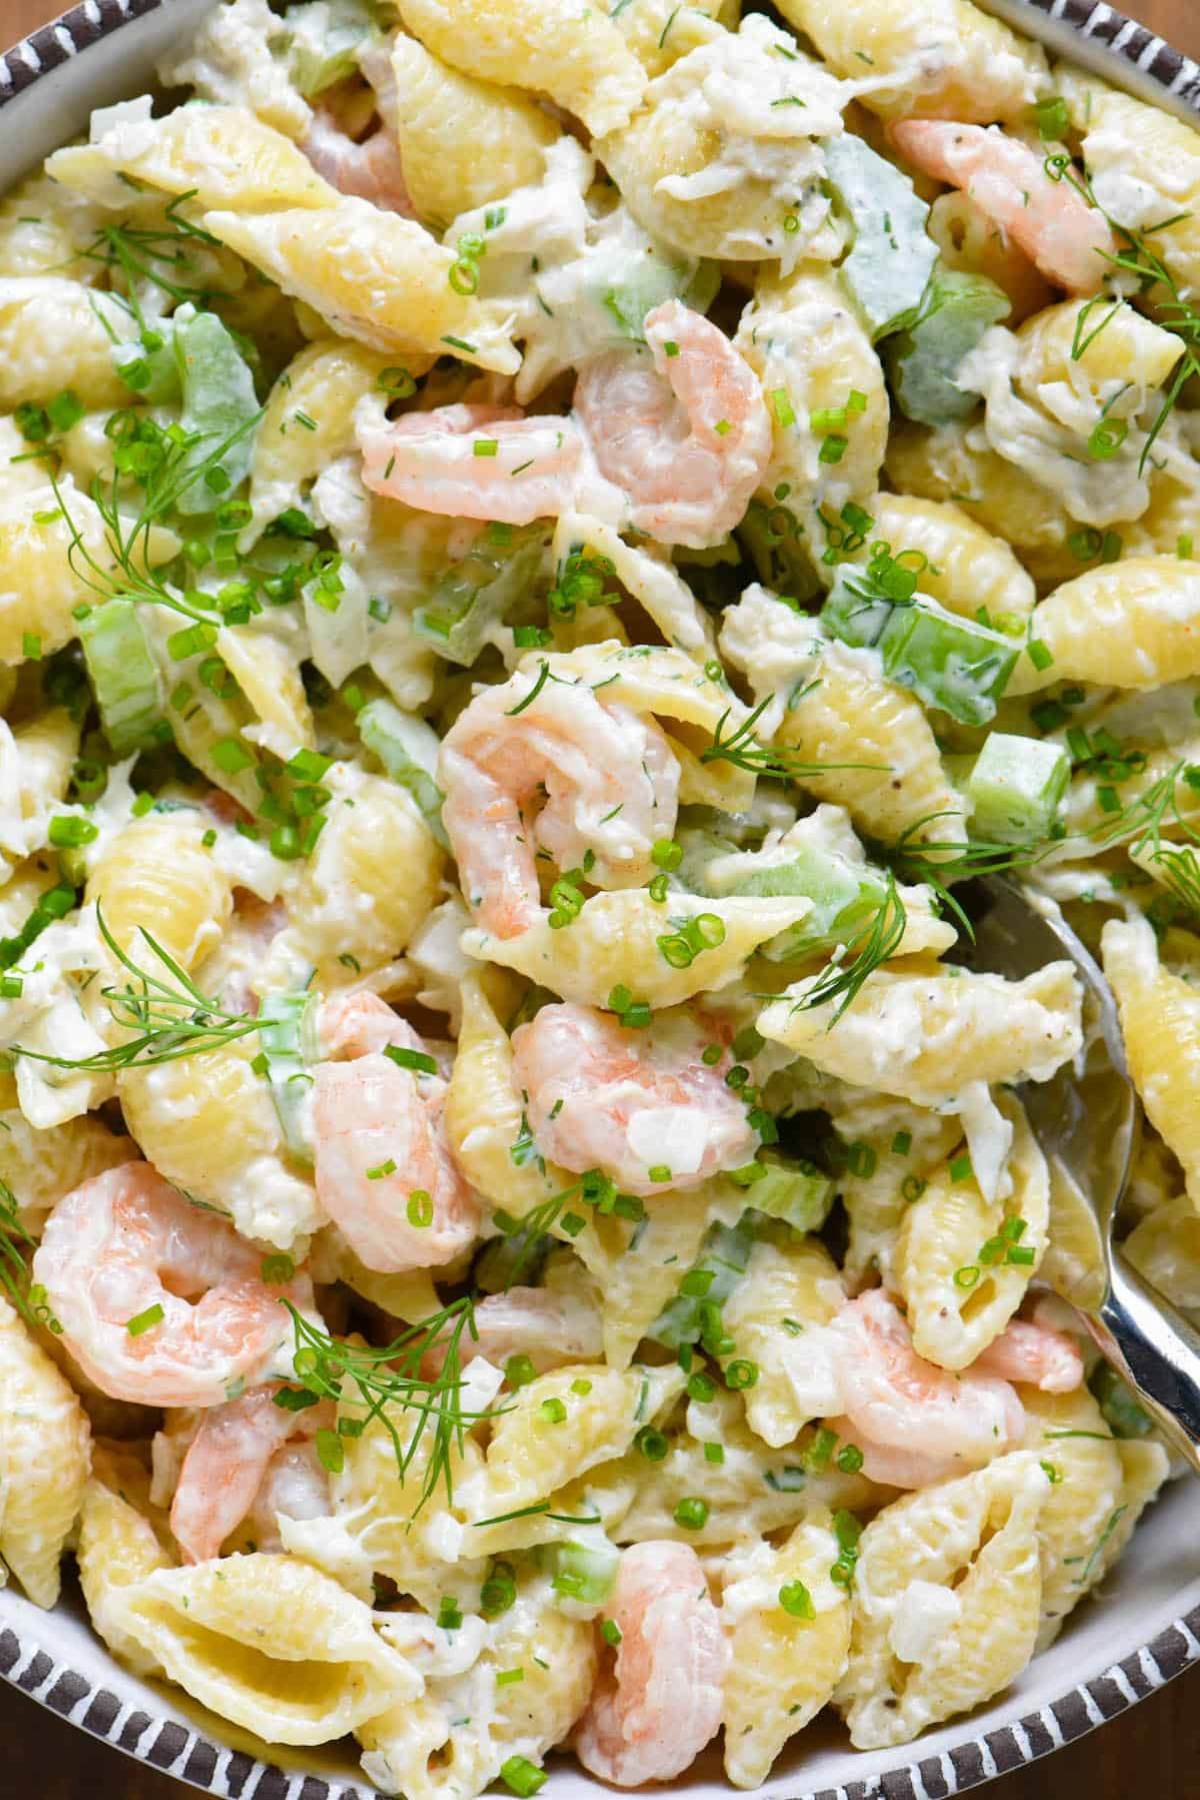 Close-up of pasta salad with shrimp, crab, lettuce and a creamy sauce.